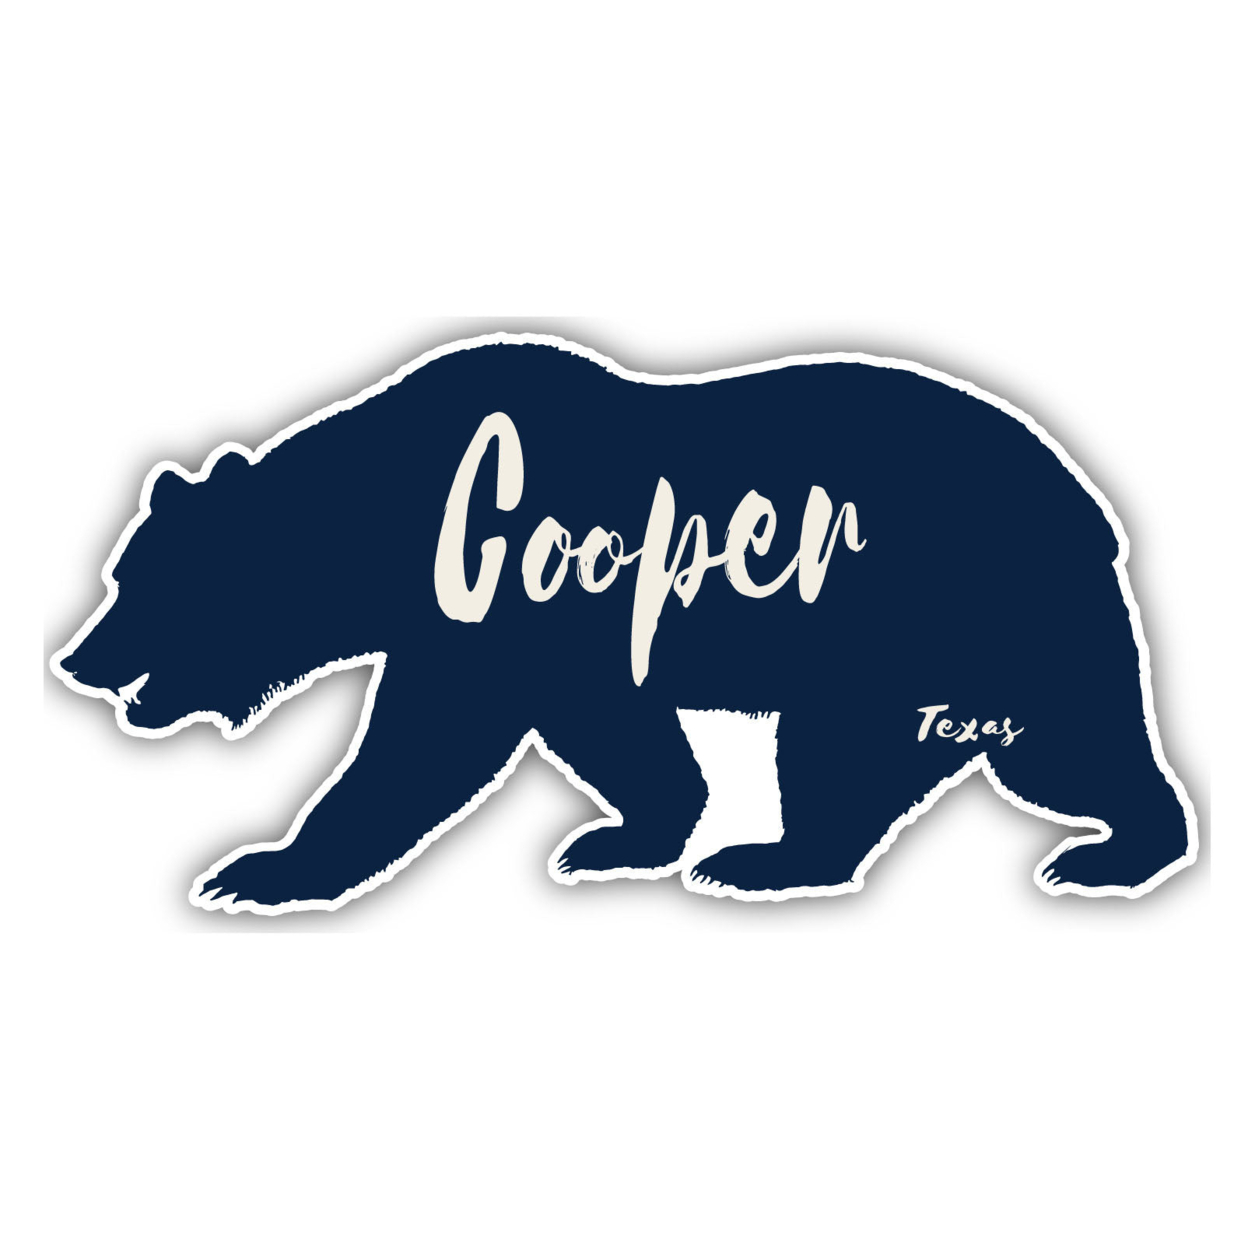 Cooper Texas Souvenir Decorative Stickers (Choose Theme And Size) - 4-Pack, 6-Inch, Bear